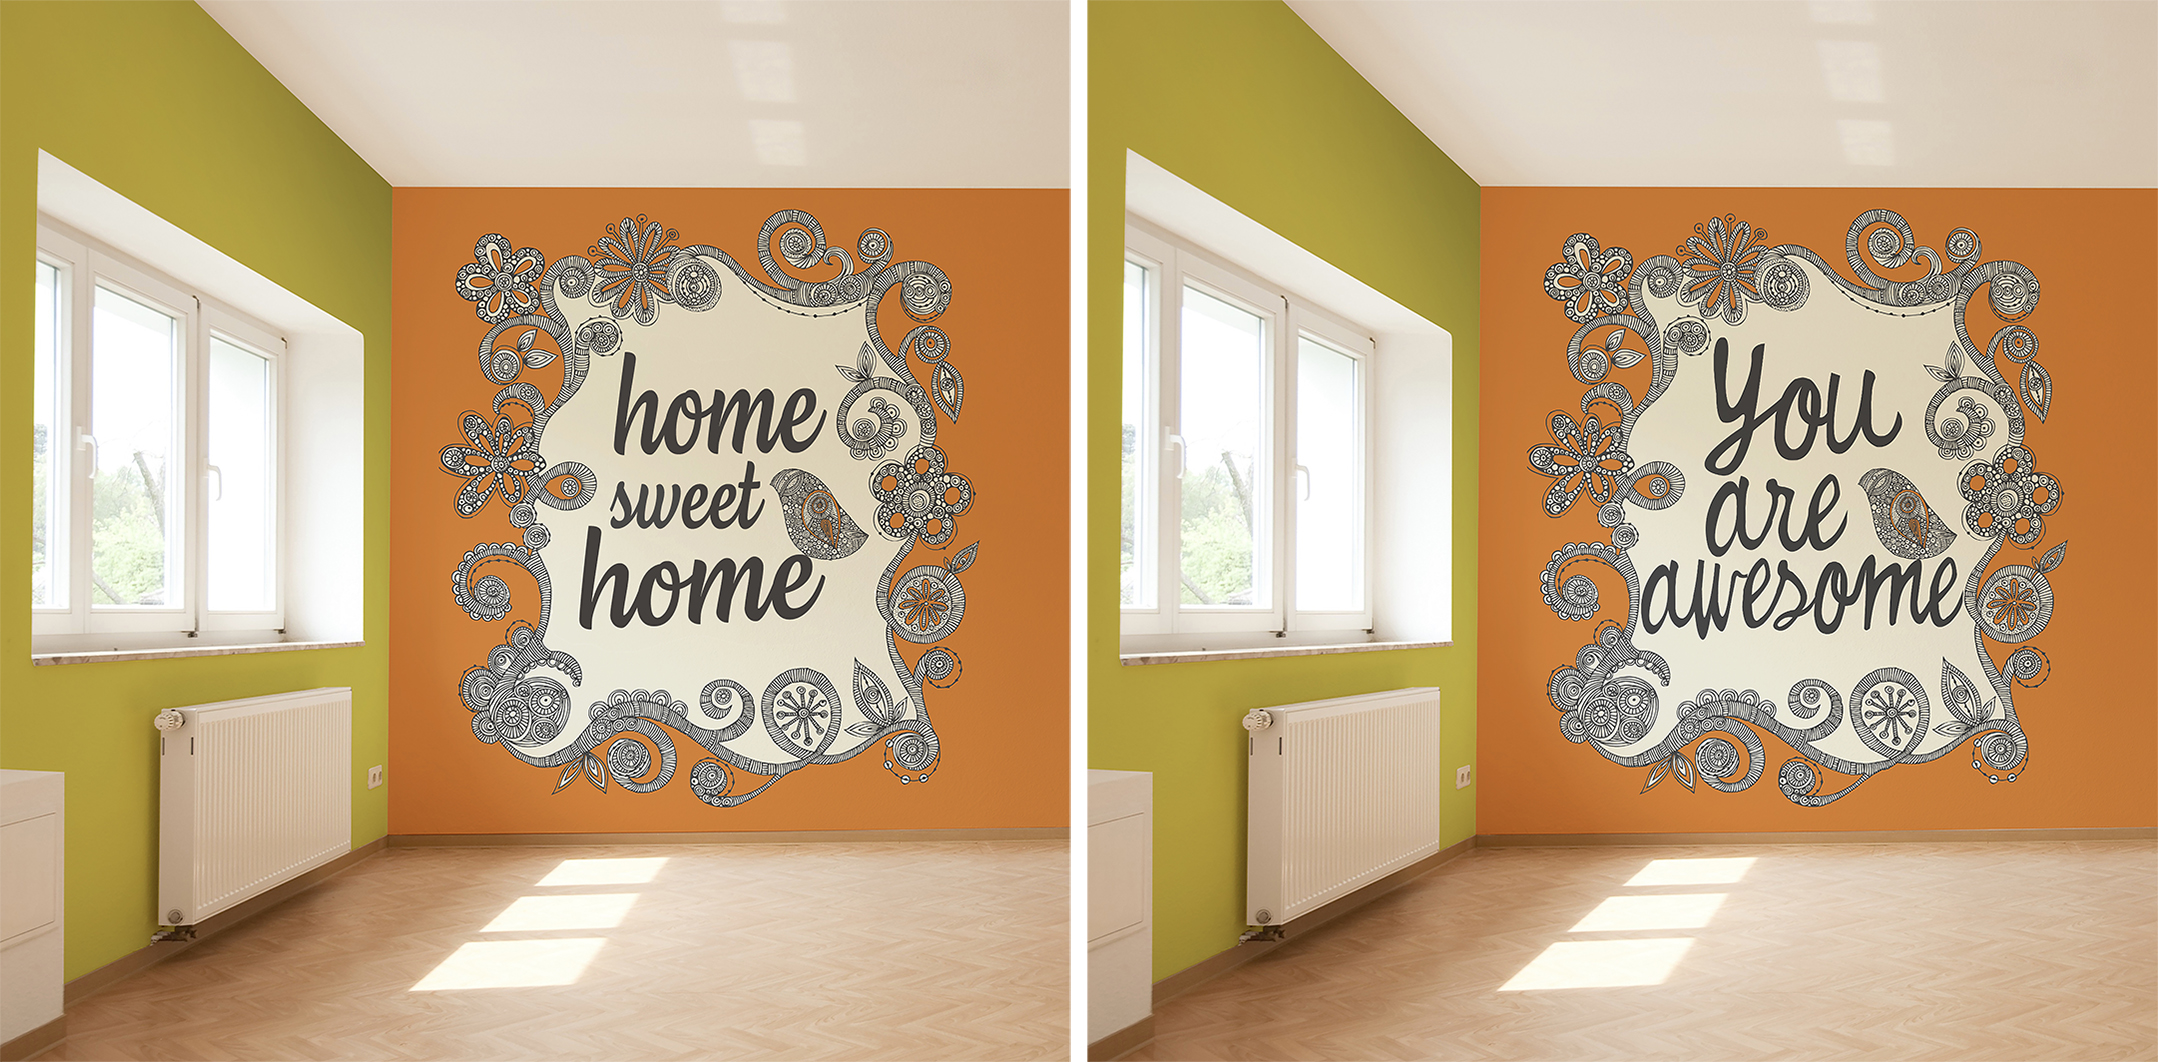 Before And After Examples Of Adding A Message To a Wall Mural